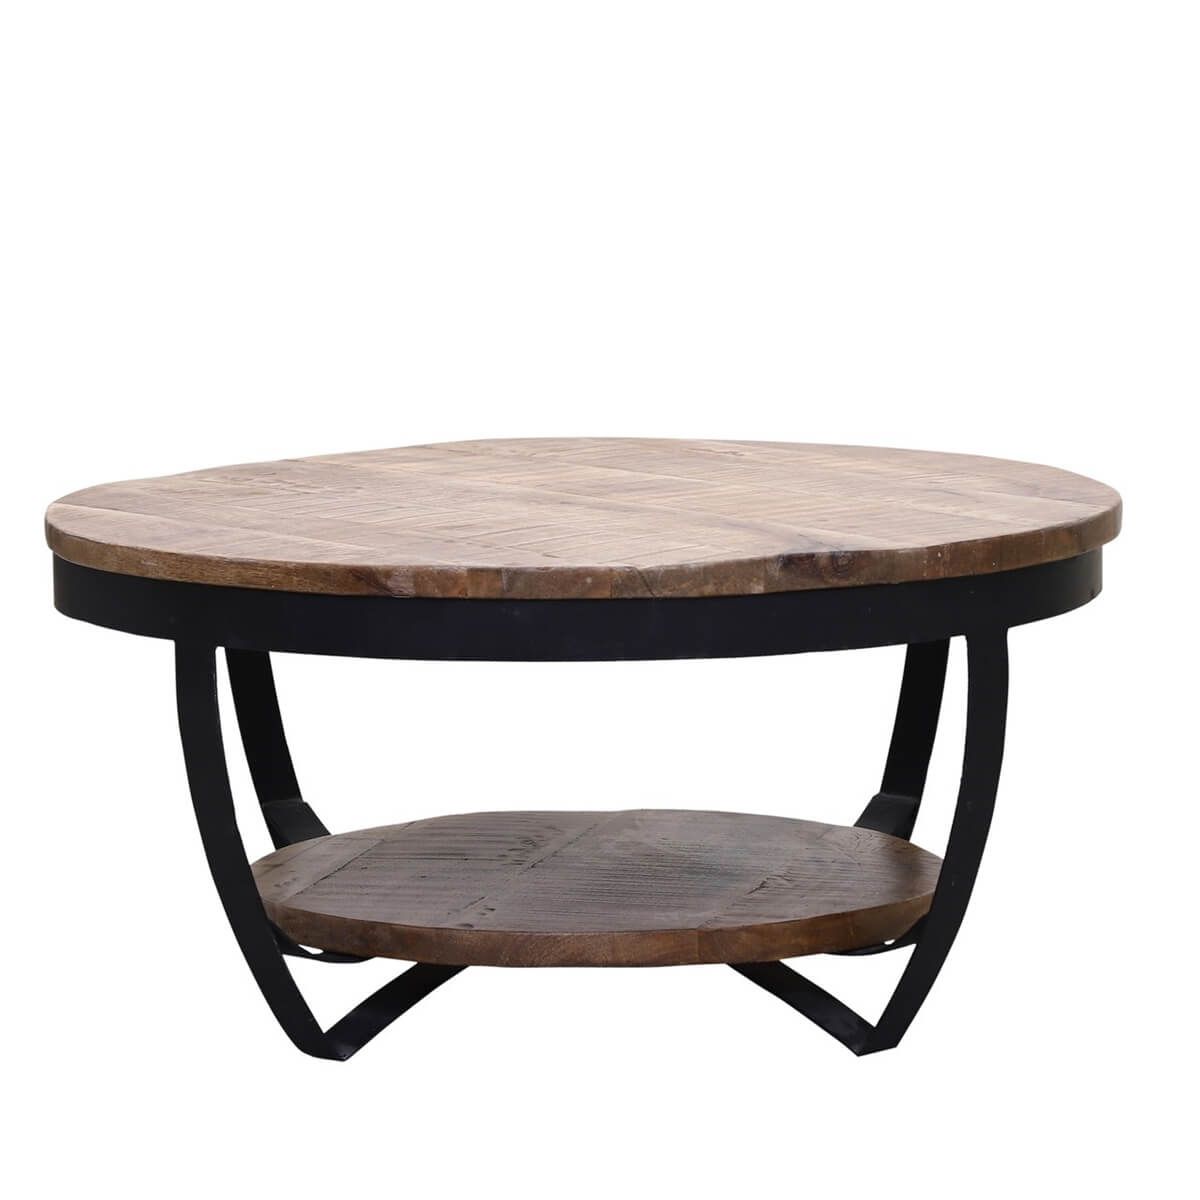 Farmhouse & Industrial Style Reclaimed Wood 2 Tier Round Coffee Table Throughout Farmhouse Style Coffee Tables (View 15 of 15)